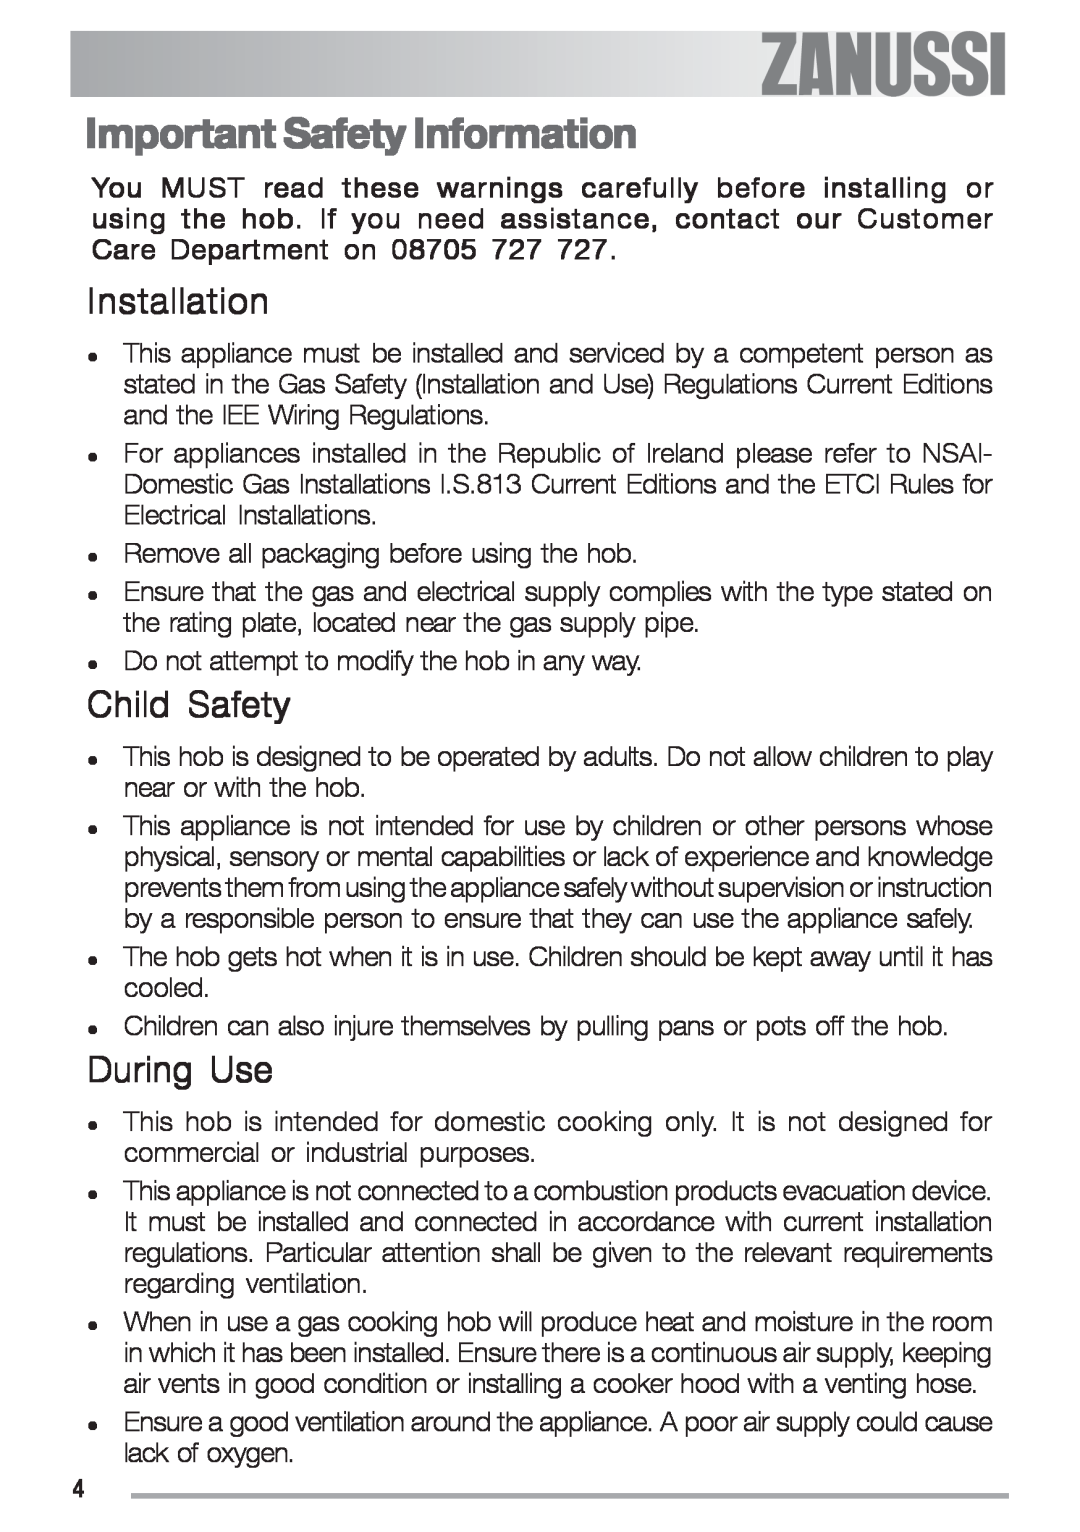 Zanussi ZGF 692 CT manual Important Safety Information, Installation, Child Safety, During Use 